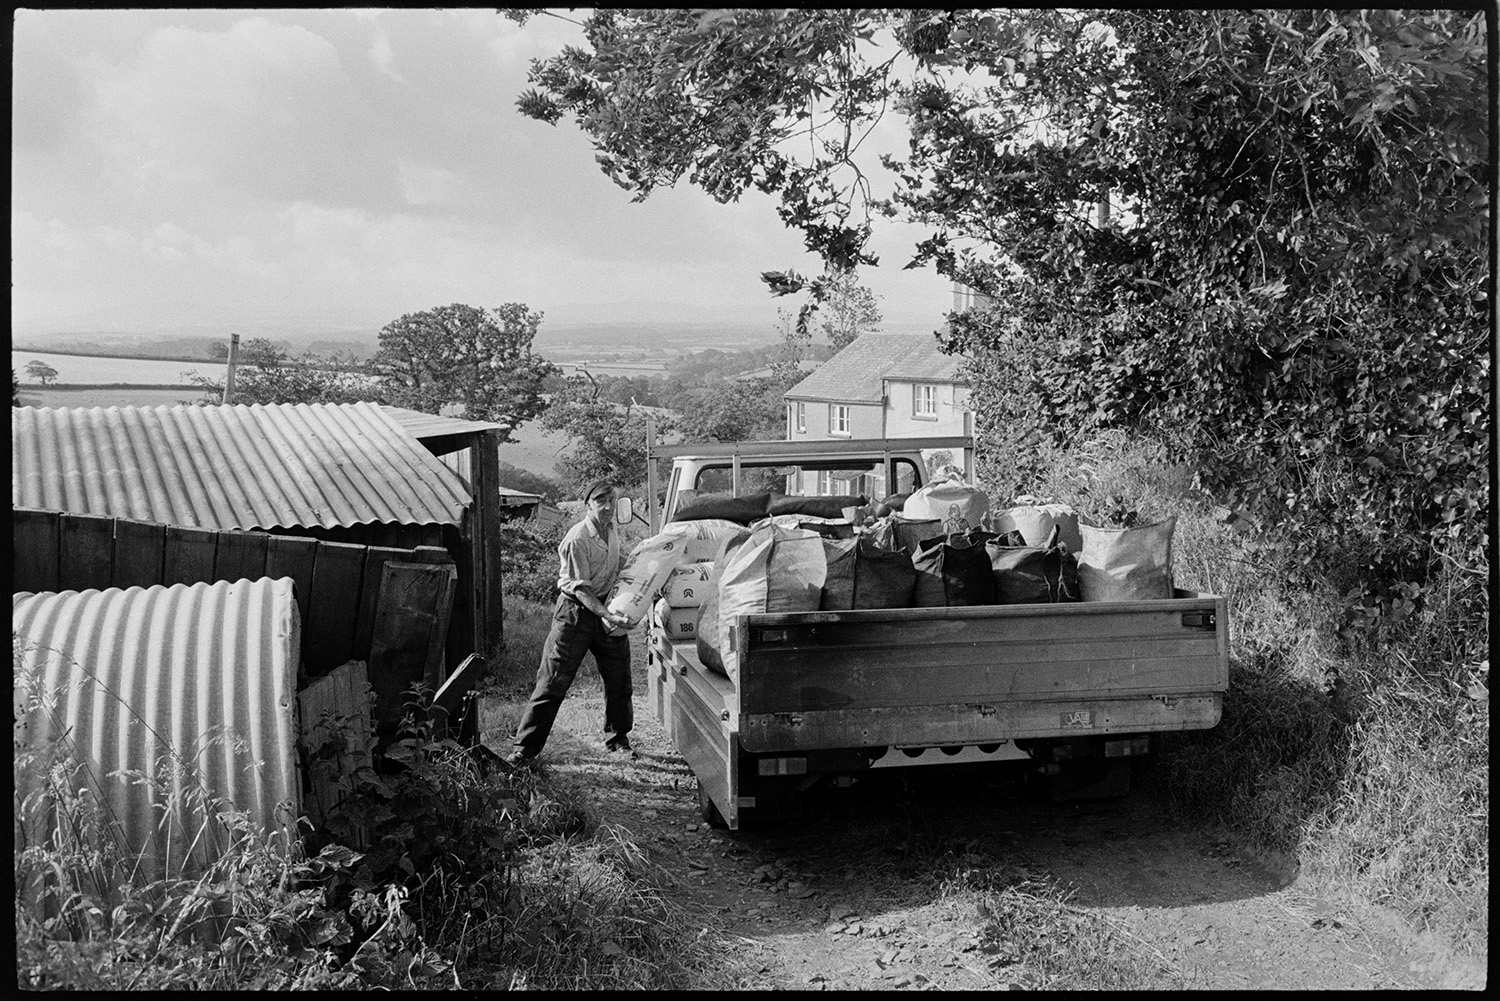 Man delivering, unloading sacks of coal from lorry.
[Mr Nott unloading sacks of coal from a truck parked at the entrance to Berry Farm, Iddesleigh, next to corrugated iron sheds. The farmhouse and a view of surrounding countryside can be seen in the background.]